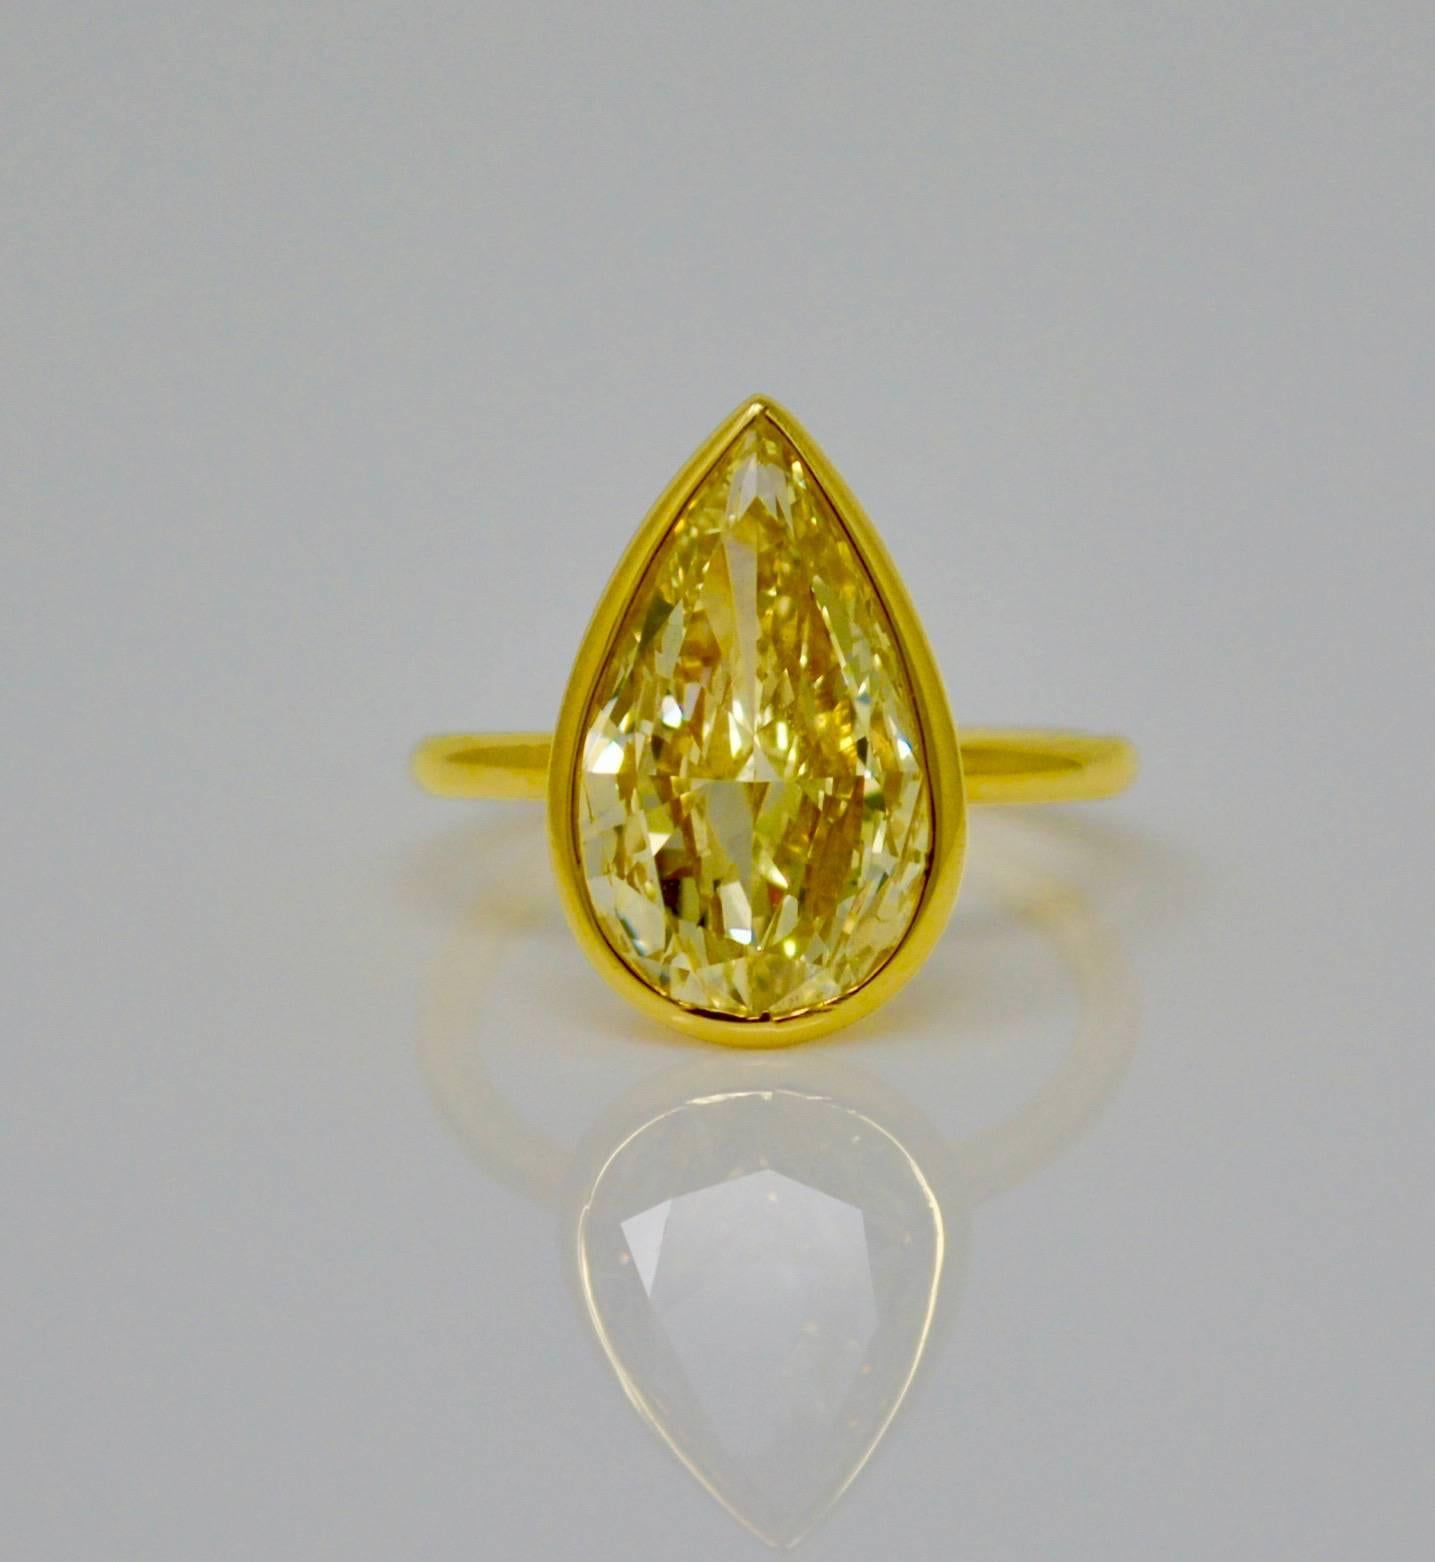 Perfect engagement ring or a special gift , this classic ring merges the best of the antique and contemporary worlds! This exquisite ring is collet set with a pear brilliant cut natural yellow diamond weighing 5.02 carat with VS1 clarity, GIA